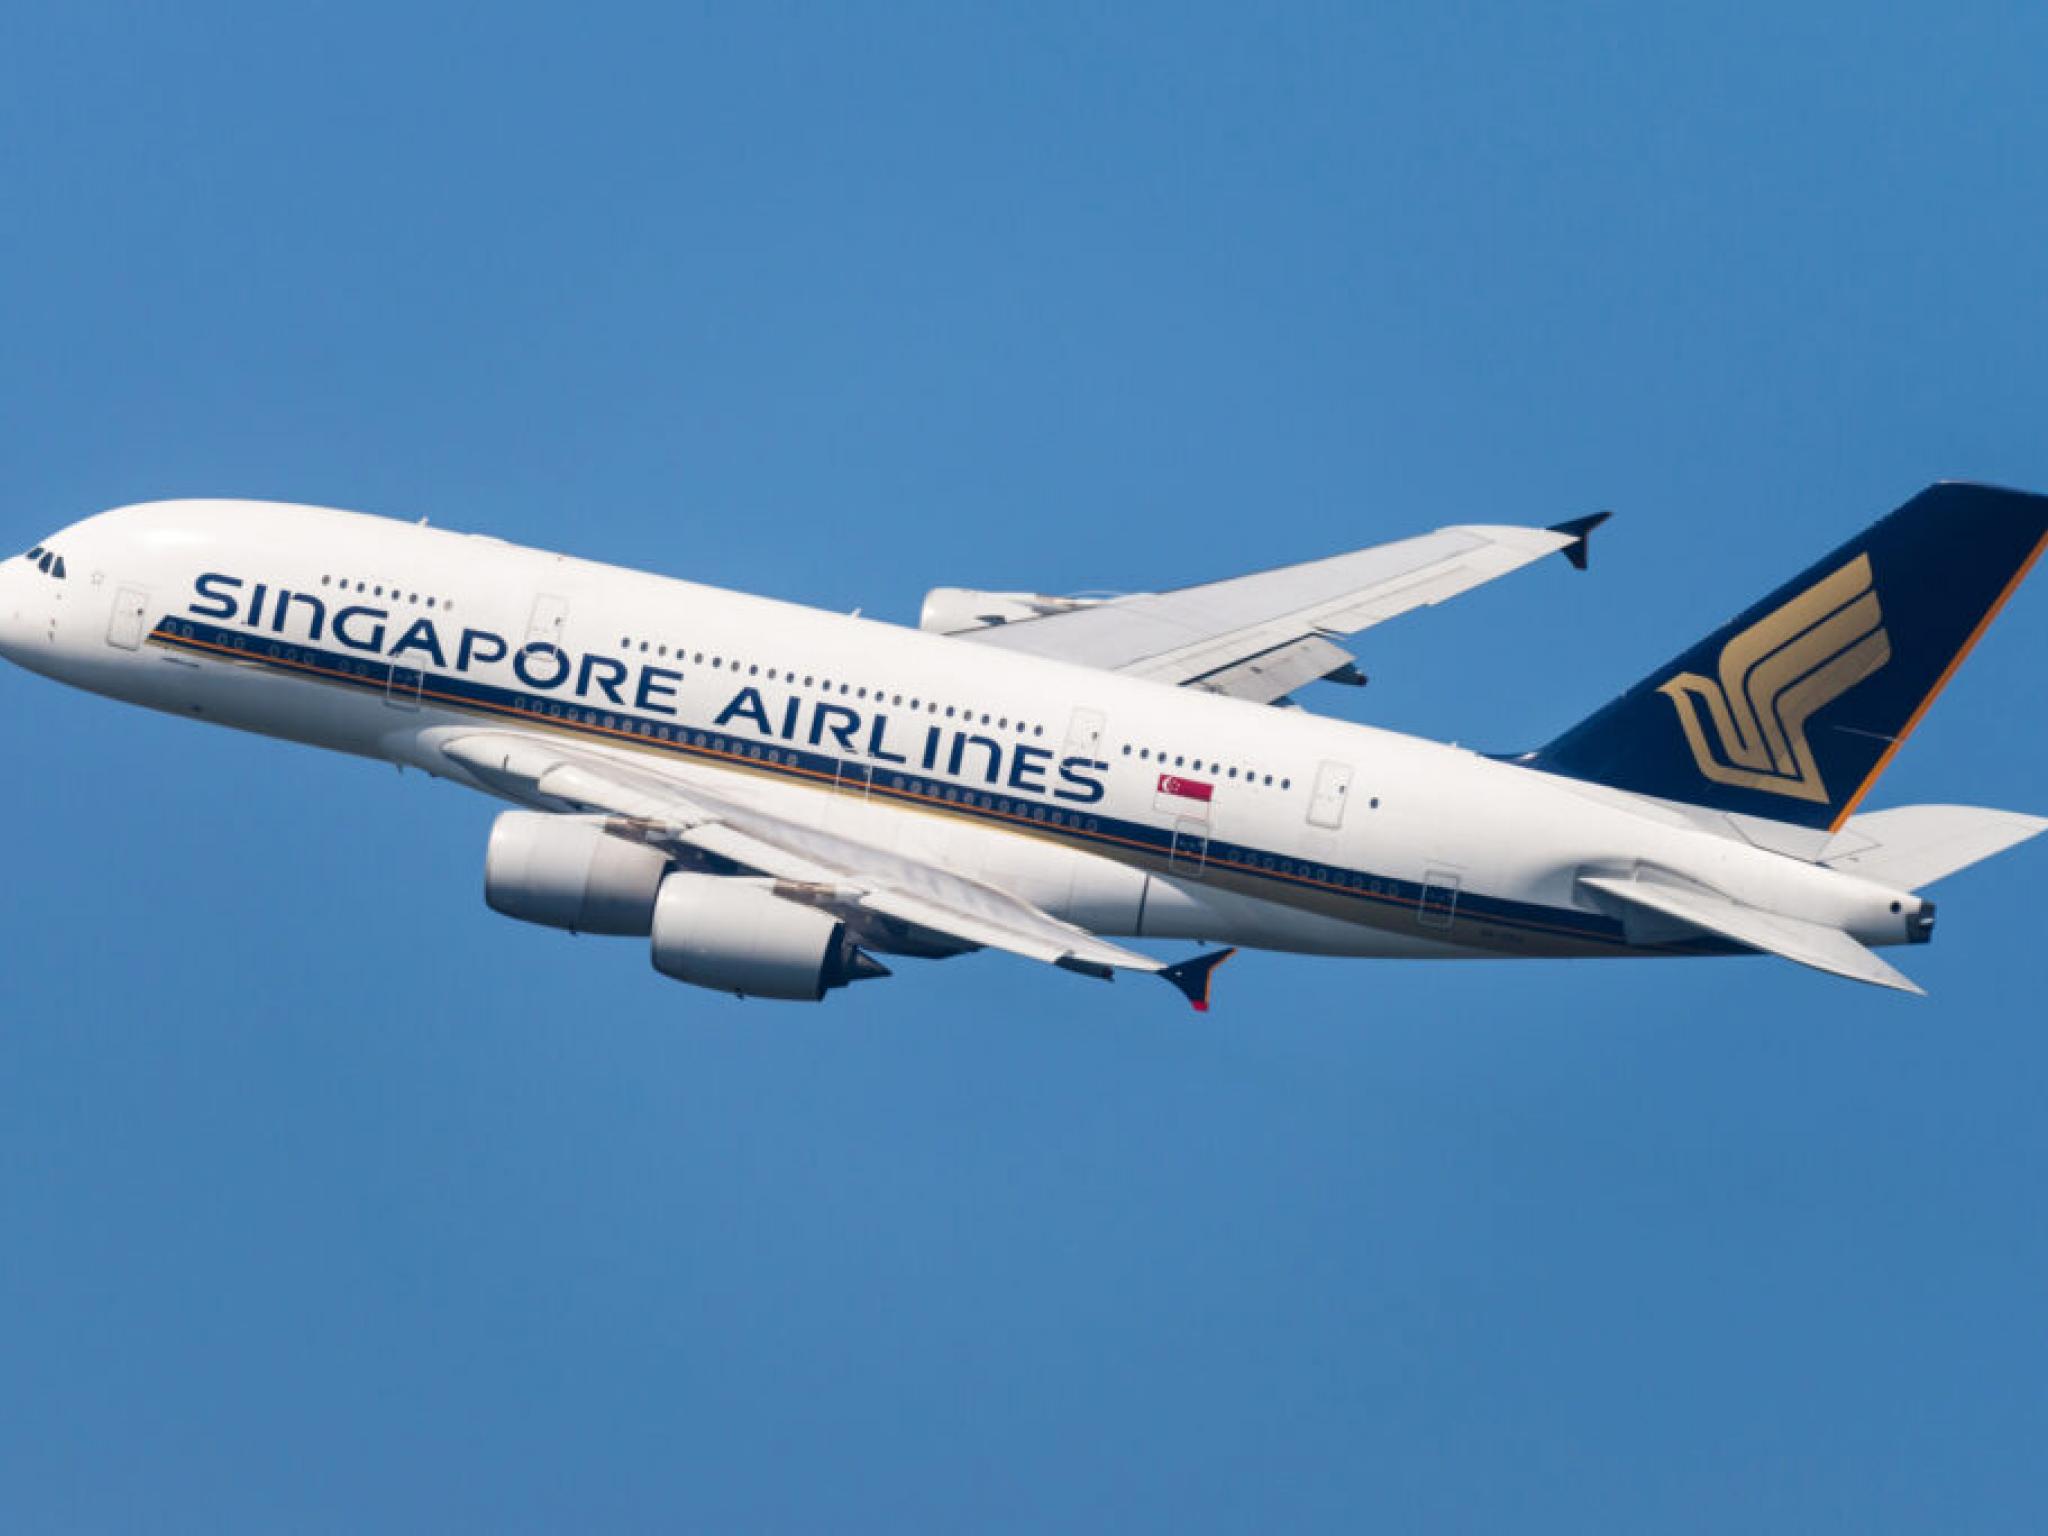  singapore-airlines-offers-up-to-25000-in-compensation-to-passengers-after-fatal-turbulence-incident 